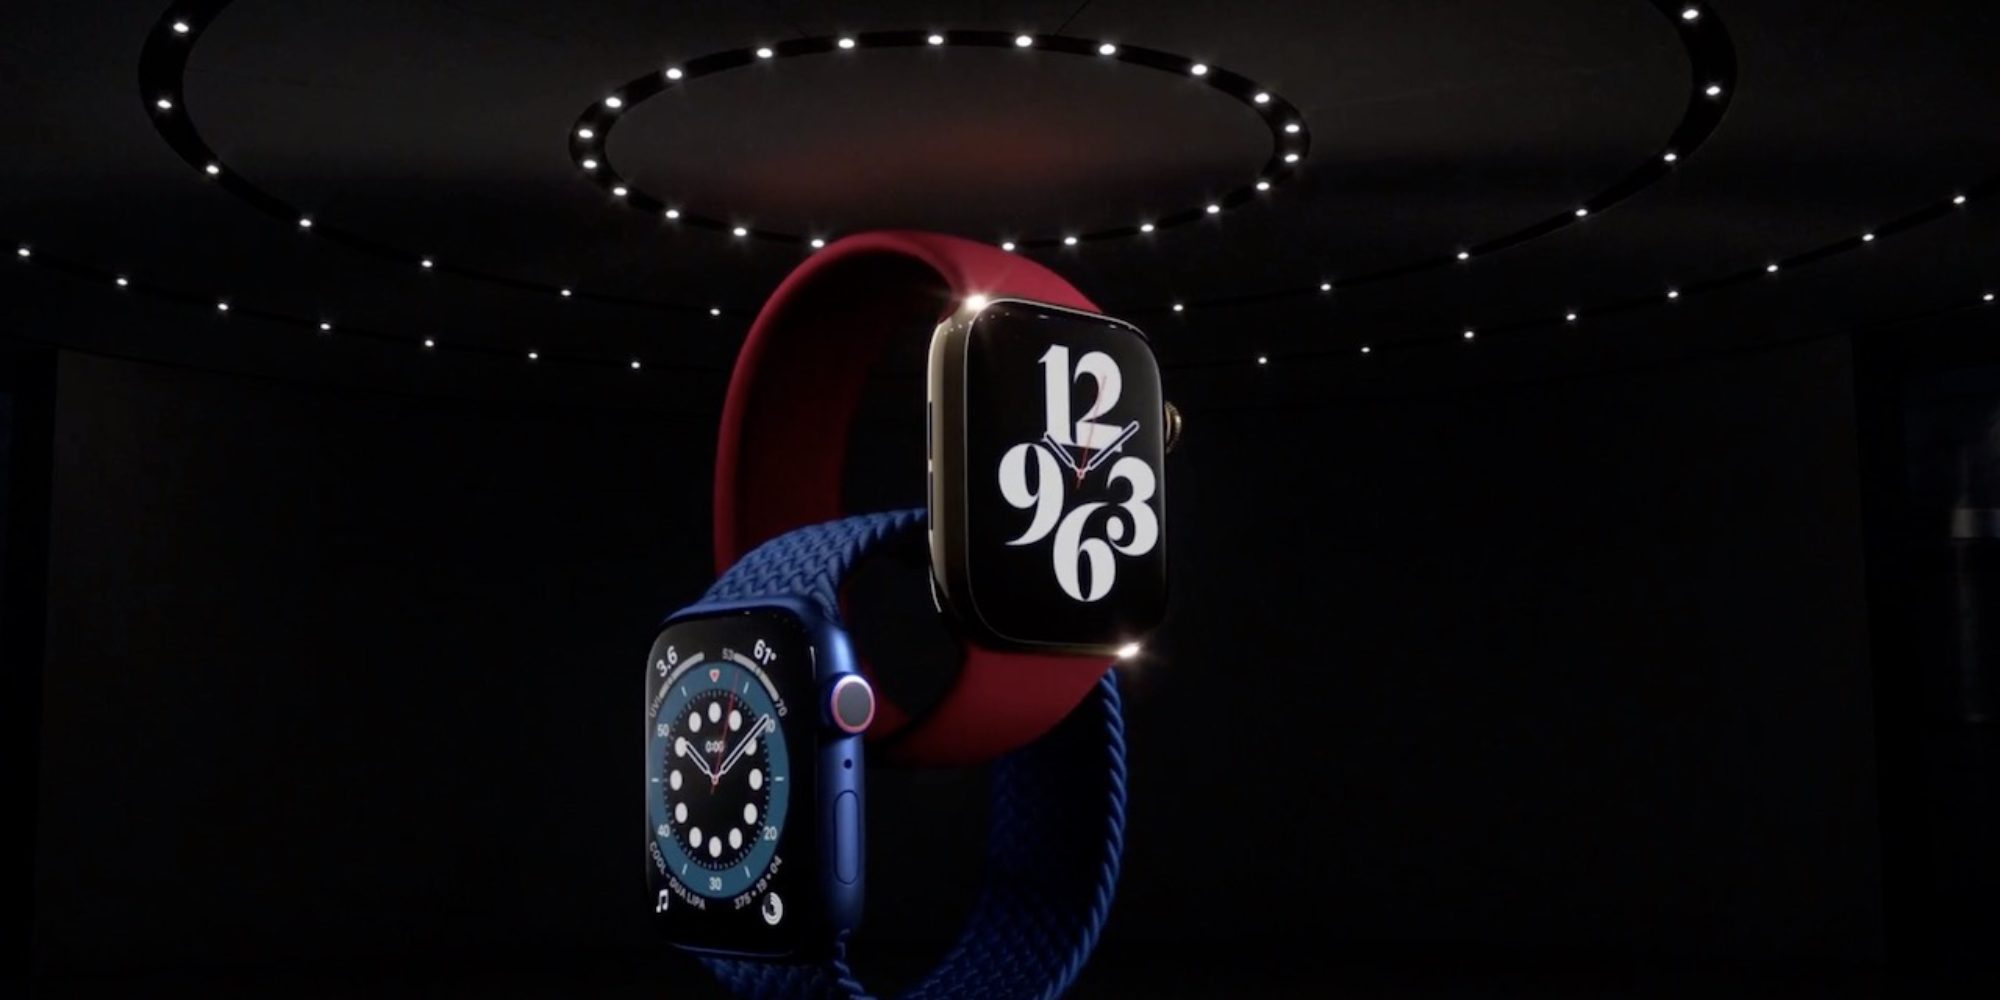 Apple Releases Apple Watch Series 6, Apple Watch SE, new iPad Air, and Subscription Services